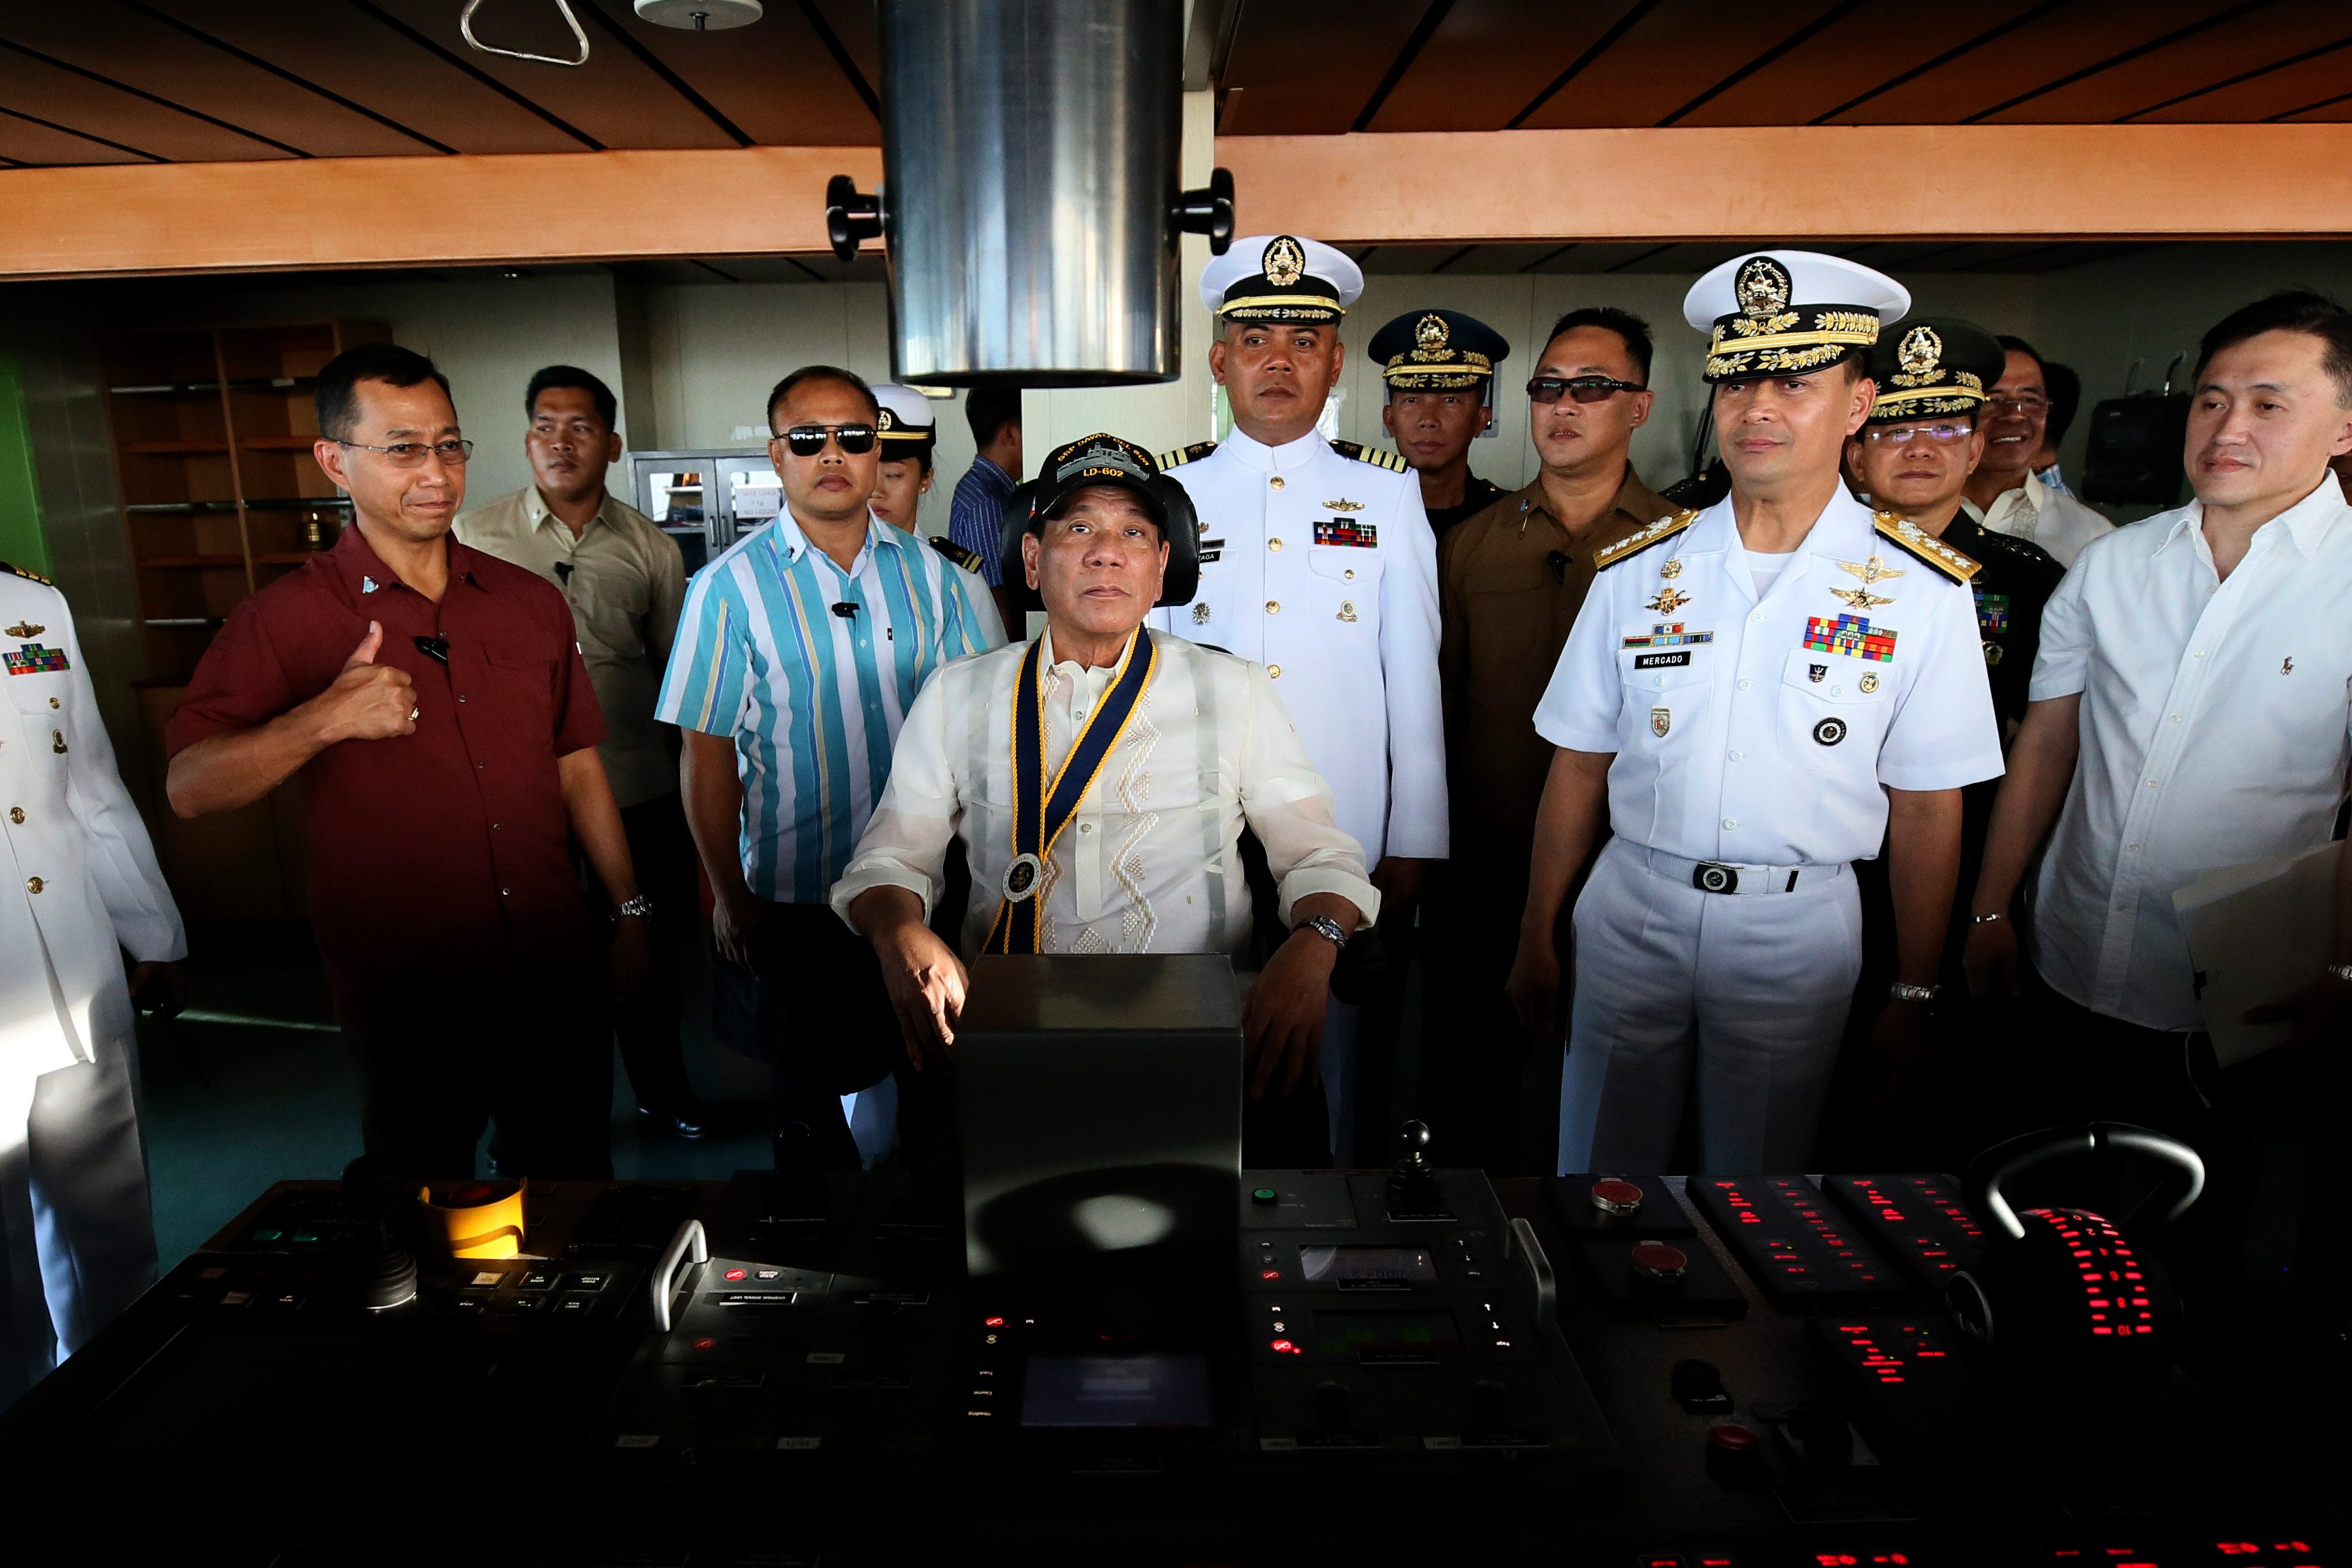 MAN AT THE HELM. President Rodrigo Duterte takes a seat at the ship's bridge during the 119th anniversary celebration of the Philippine Navy at the Sasa Wharf in Davao City on May 31, 2017. Malacañang photo   